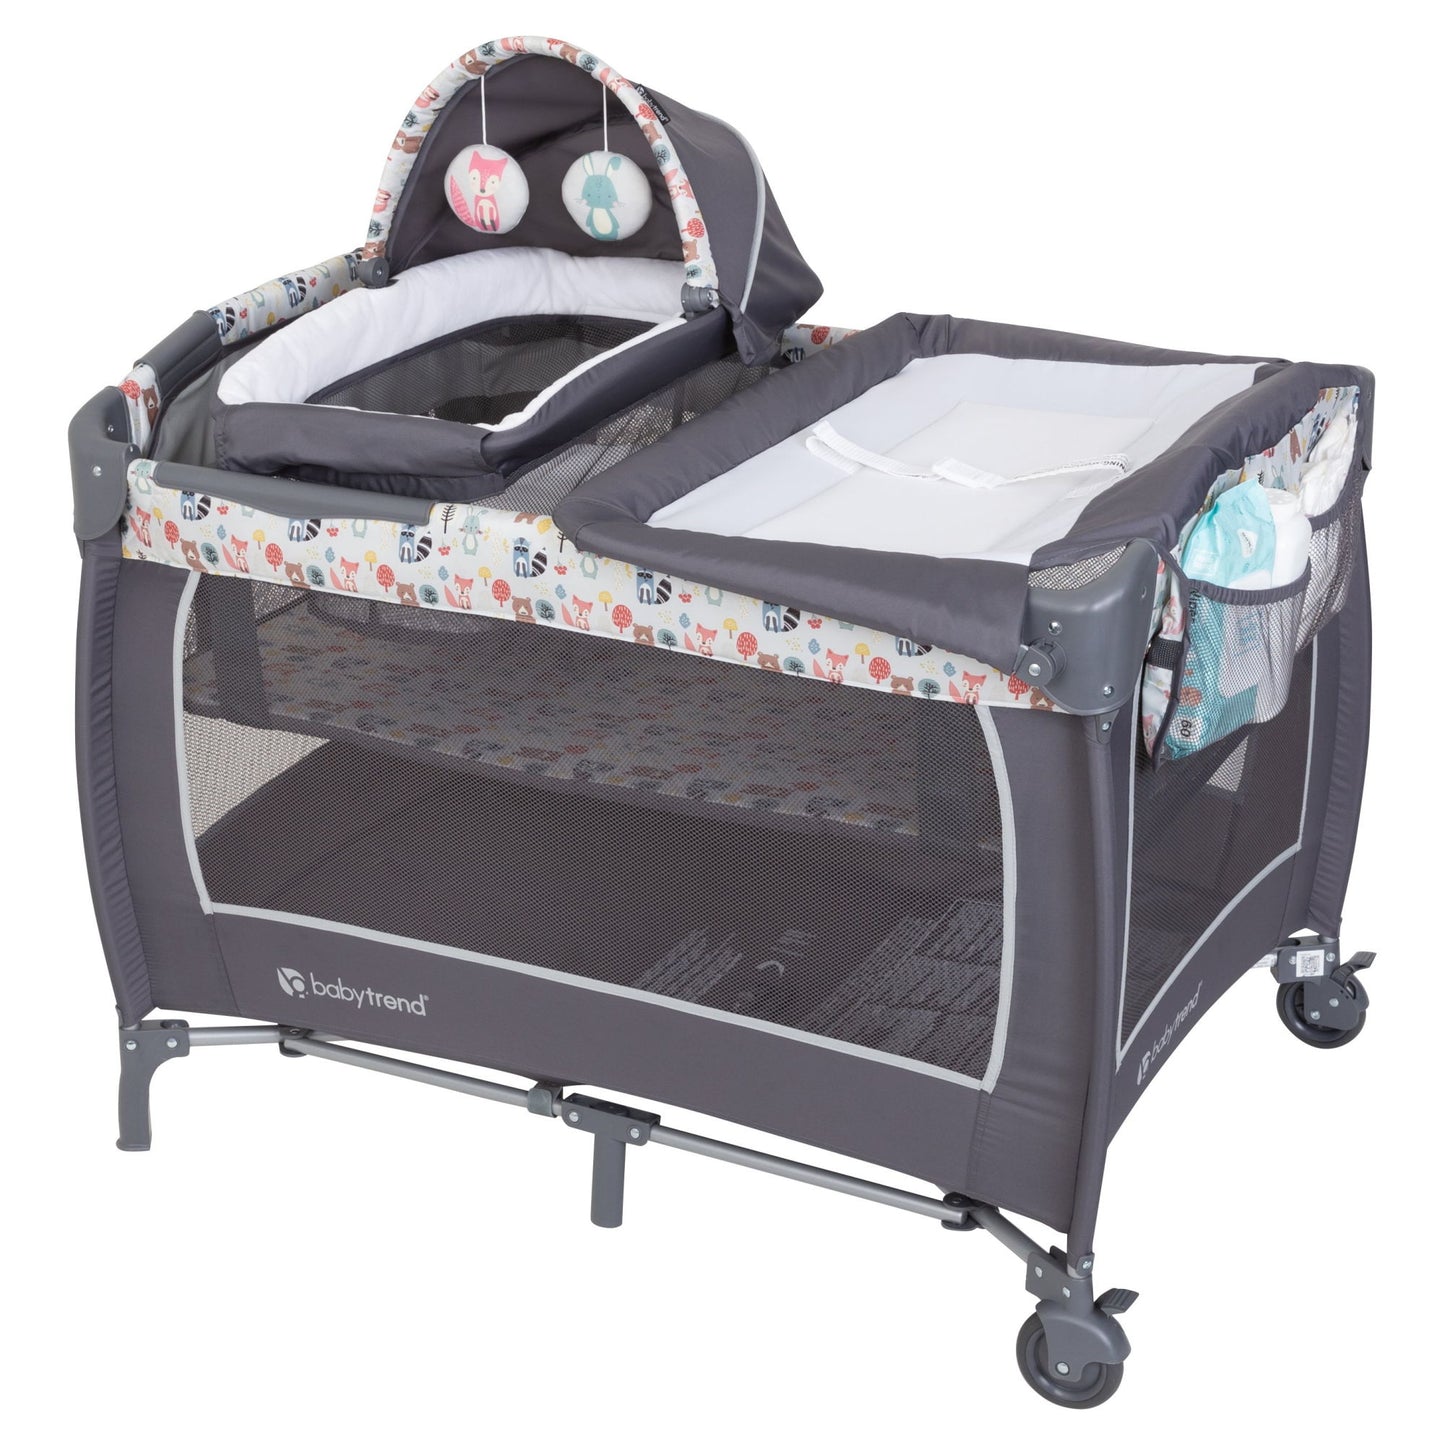 Lil Snooze Deluxe II Nursery Center Playard - Forest Party Gray